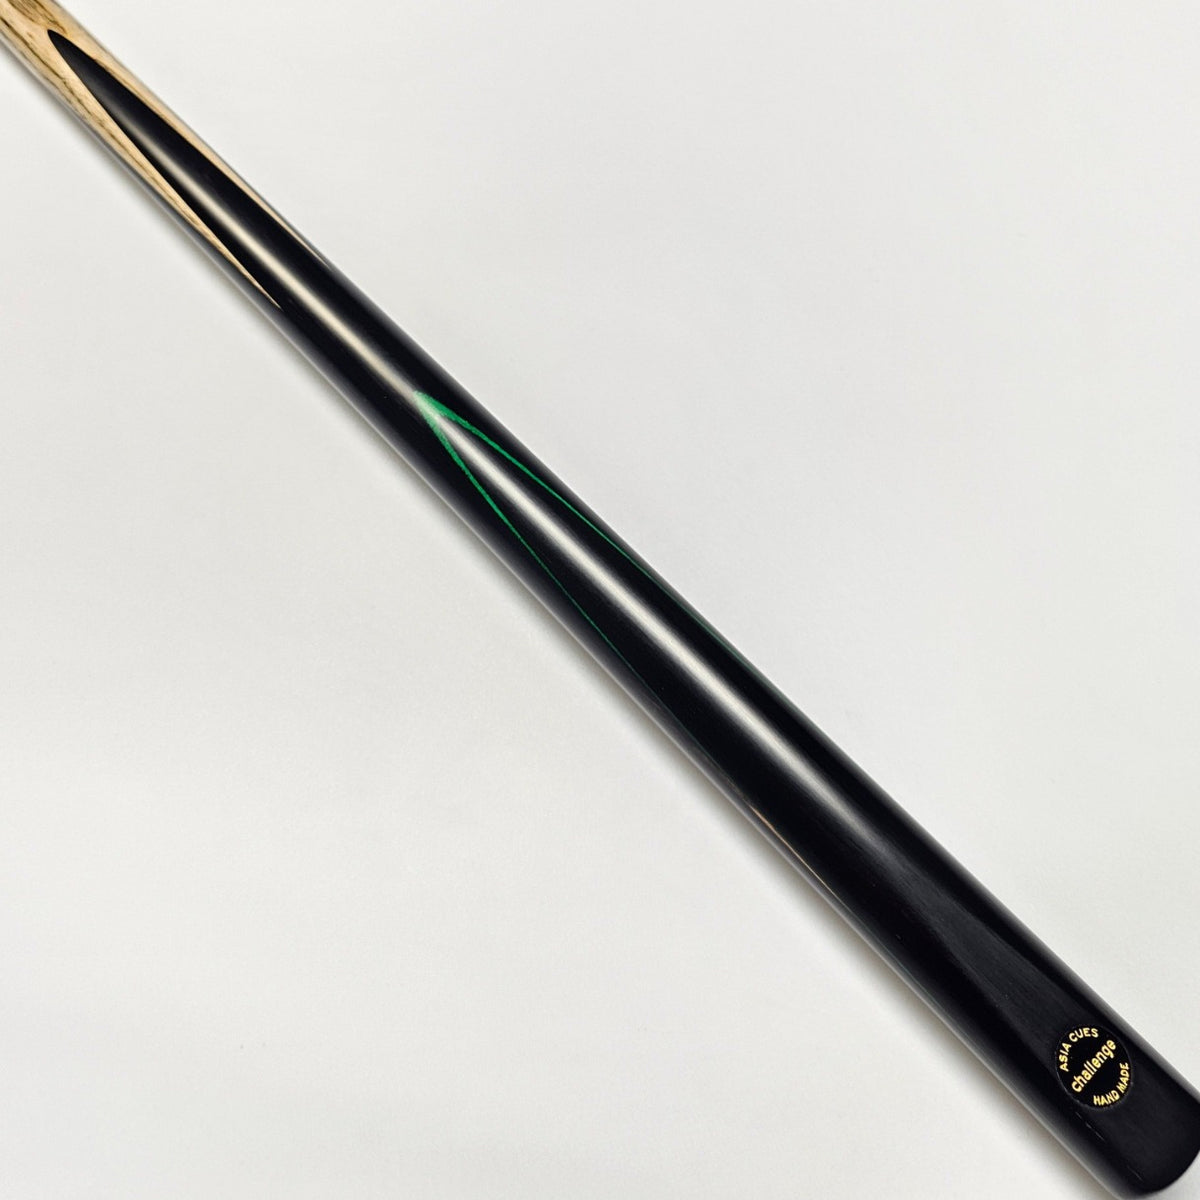 Asia Cues Challenge Range One Piece Cue Ash Shaft Ebony Butt with Green veneer. Butt View